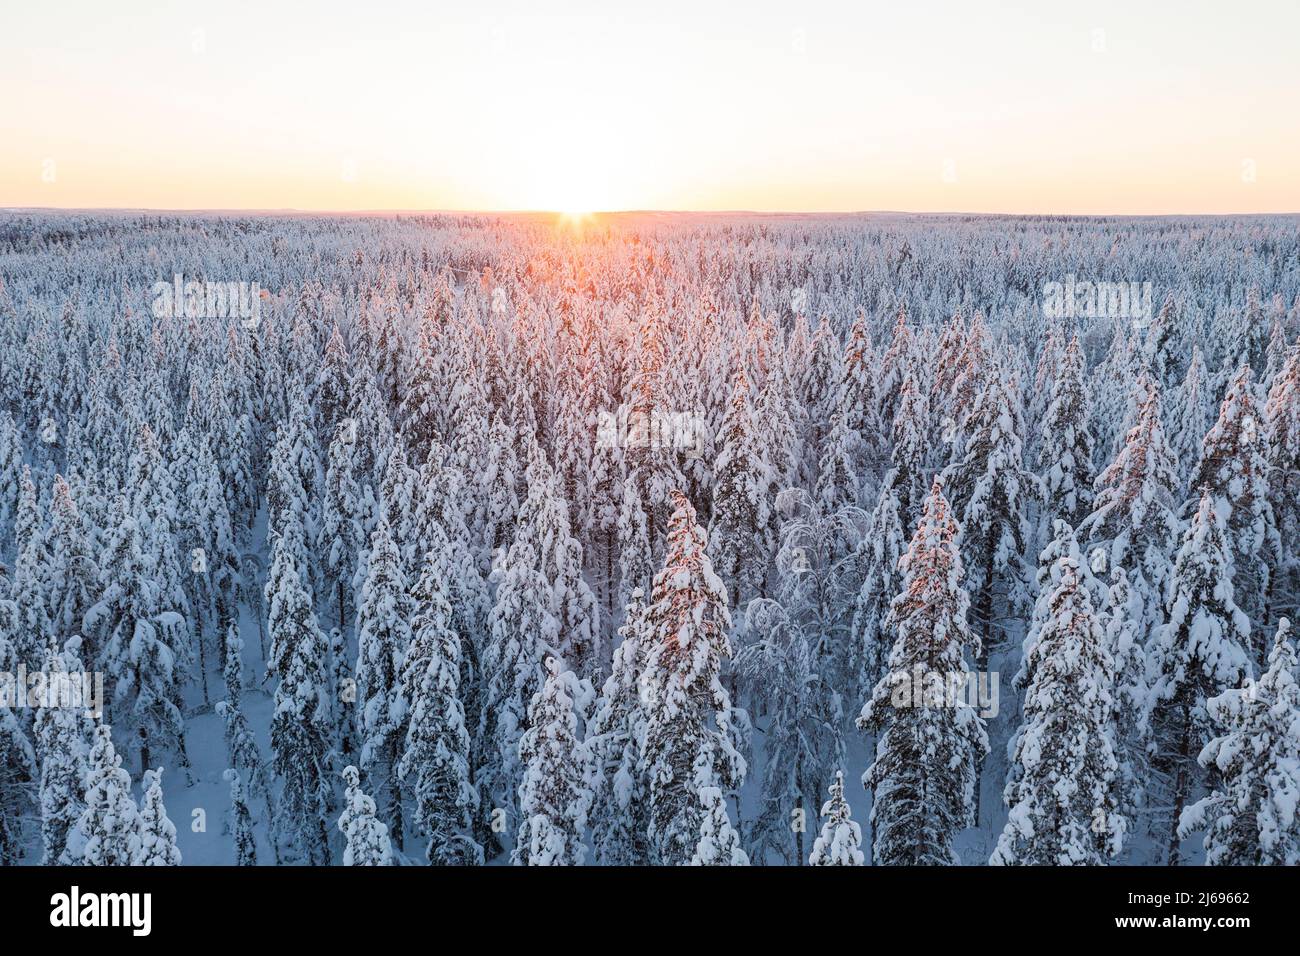 Arctic sunrise over the snowcapped forest in winter, Lapland, Finland, Europe Stock Photo